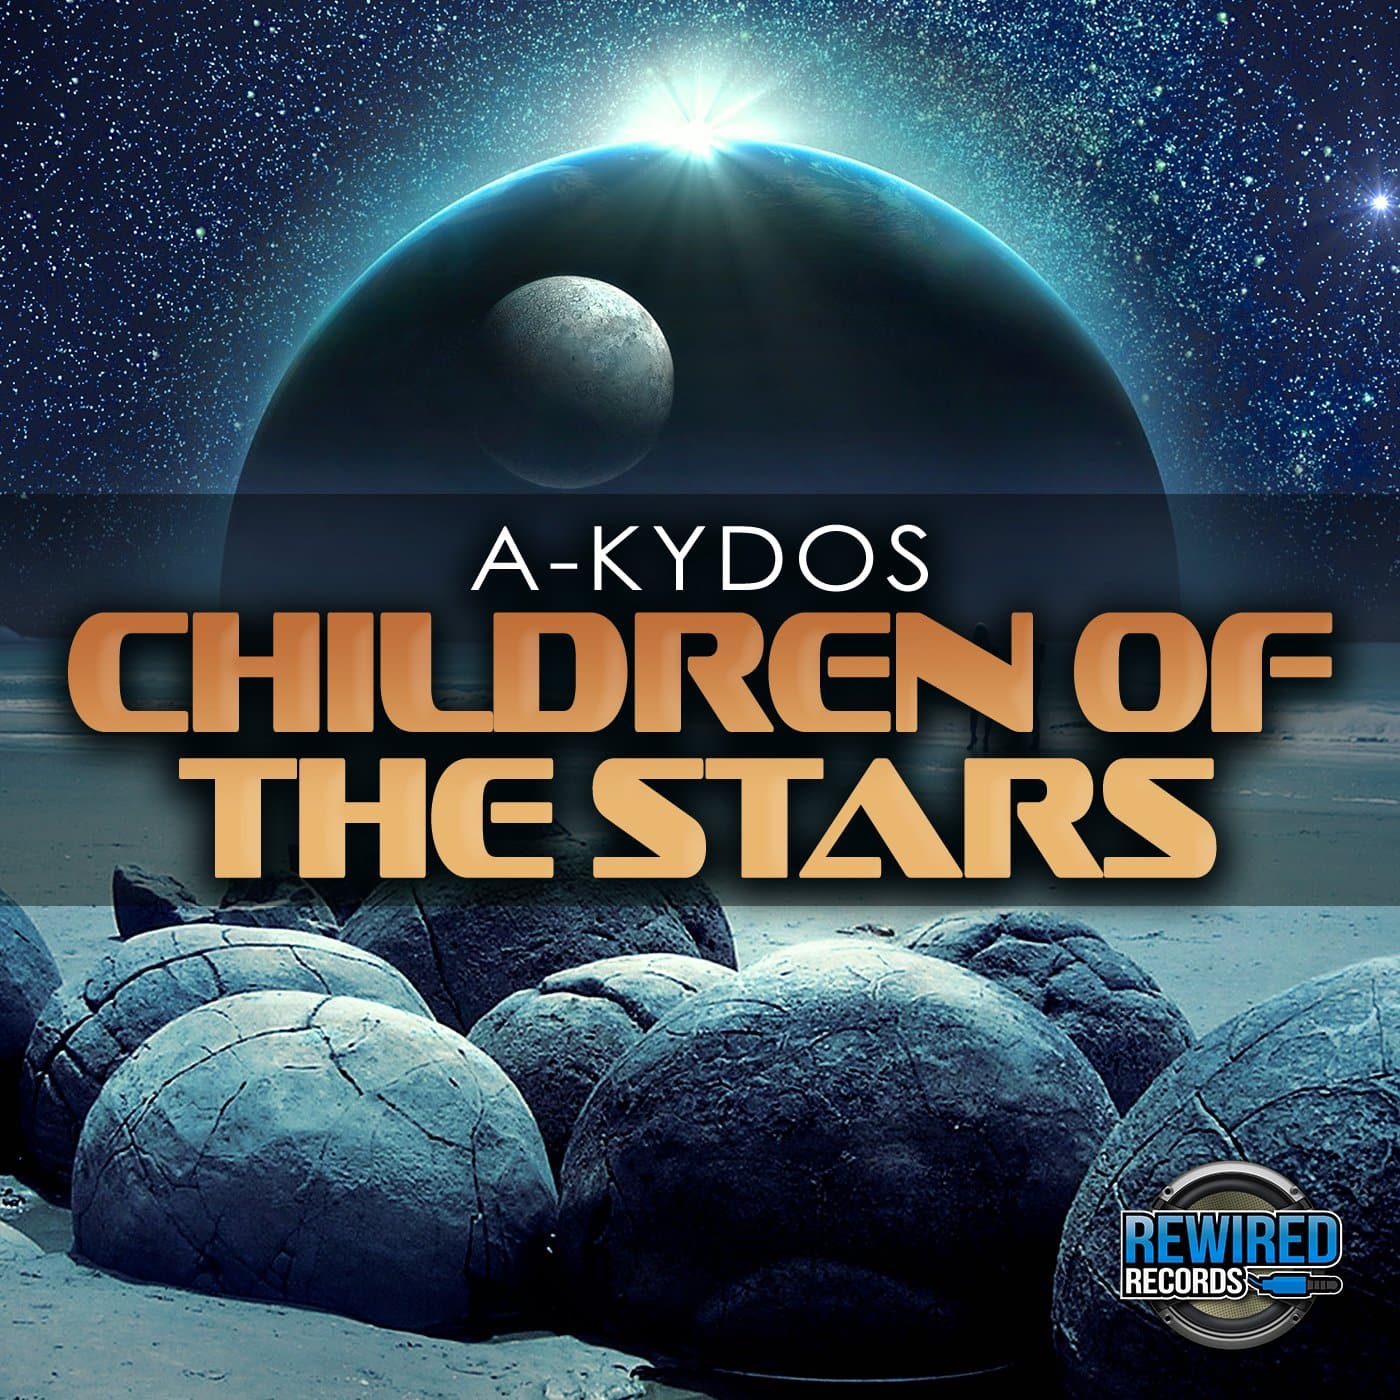 A-Kydos - Children Of The Stars - Rewired Records